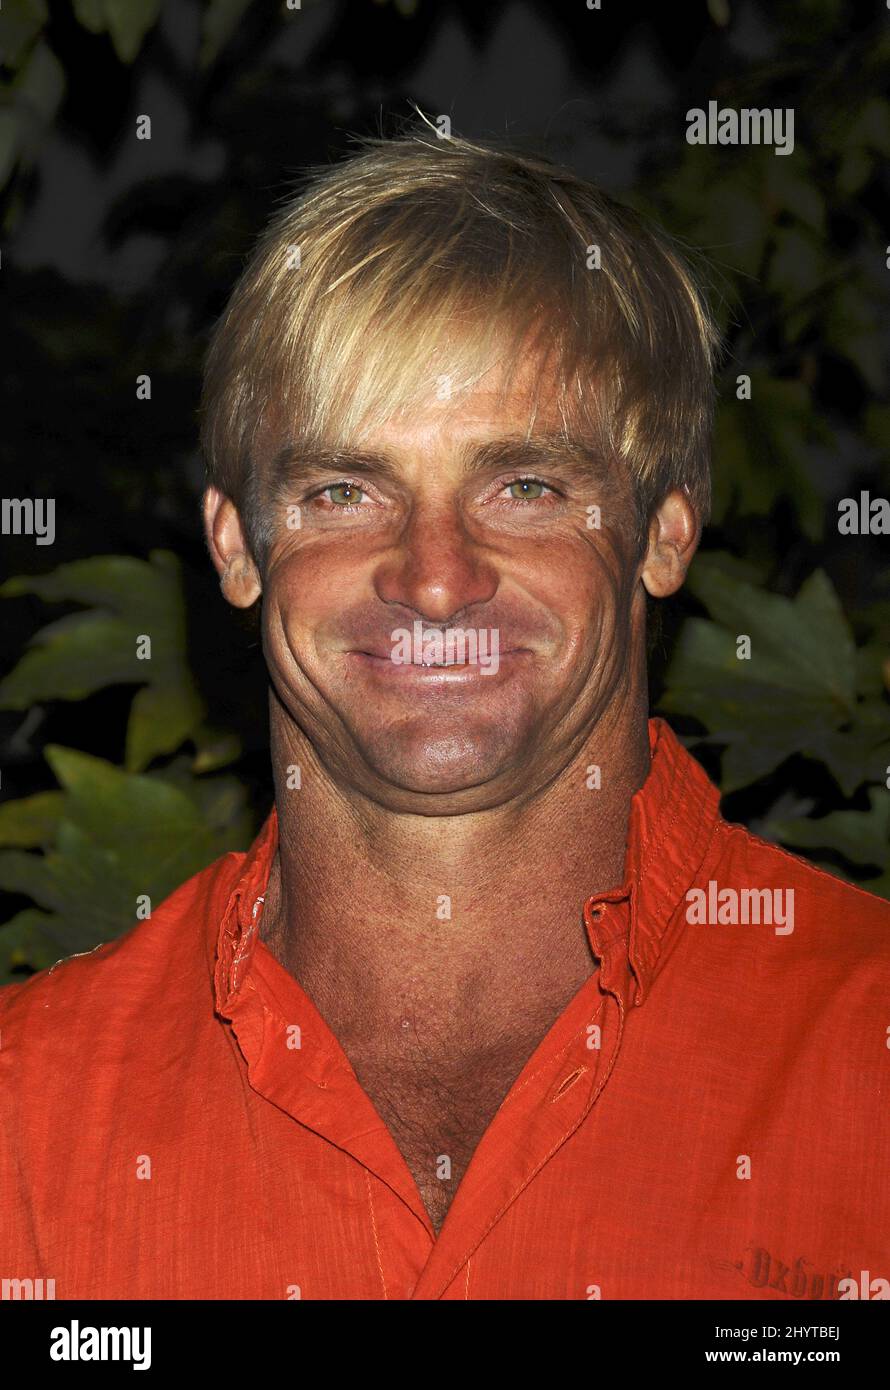 Laird Hamilton at the Oceana's Annual Partners Award Gala honoring Former President Bill Clinton held in a private residence in Pacific Palisades. Stock Photo